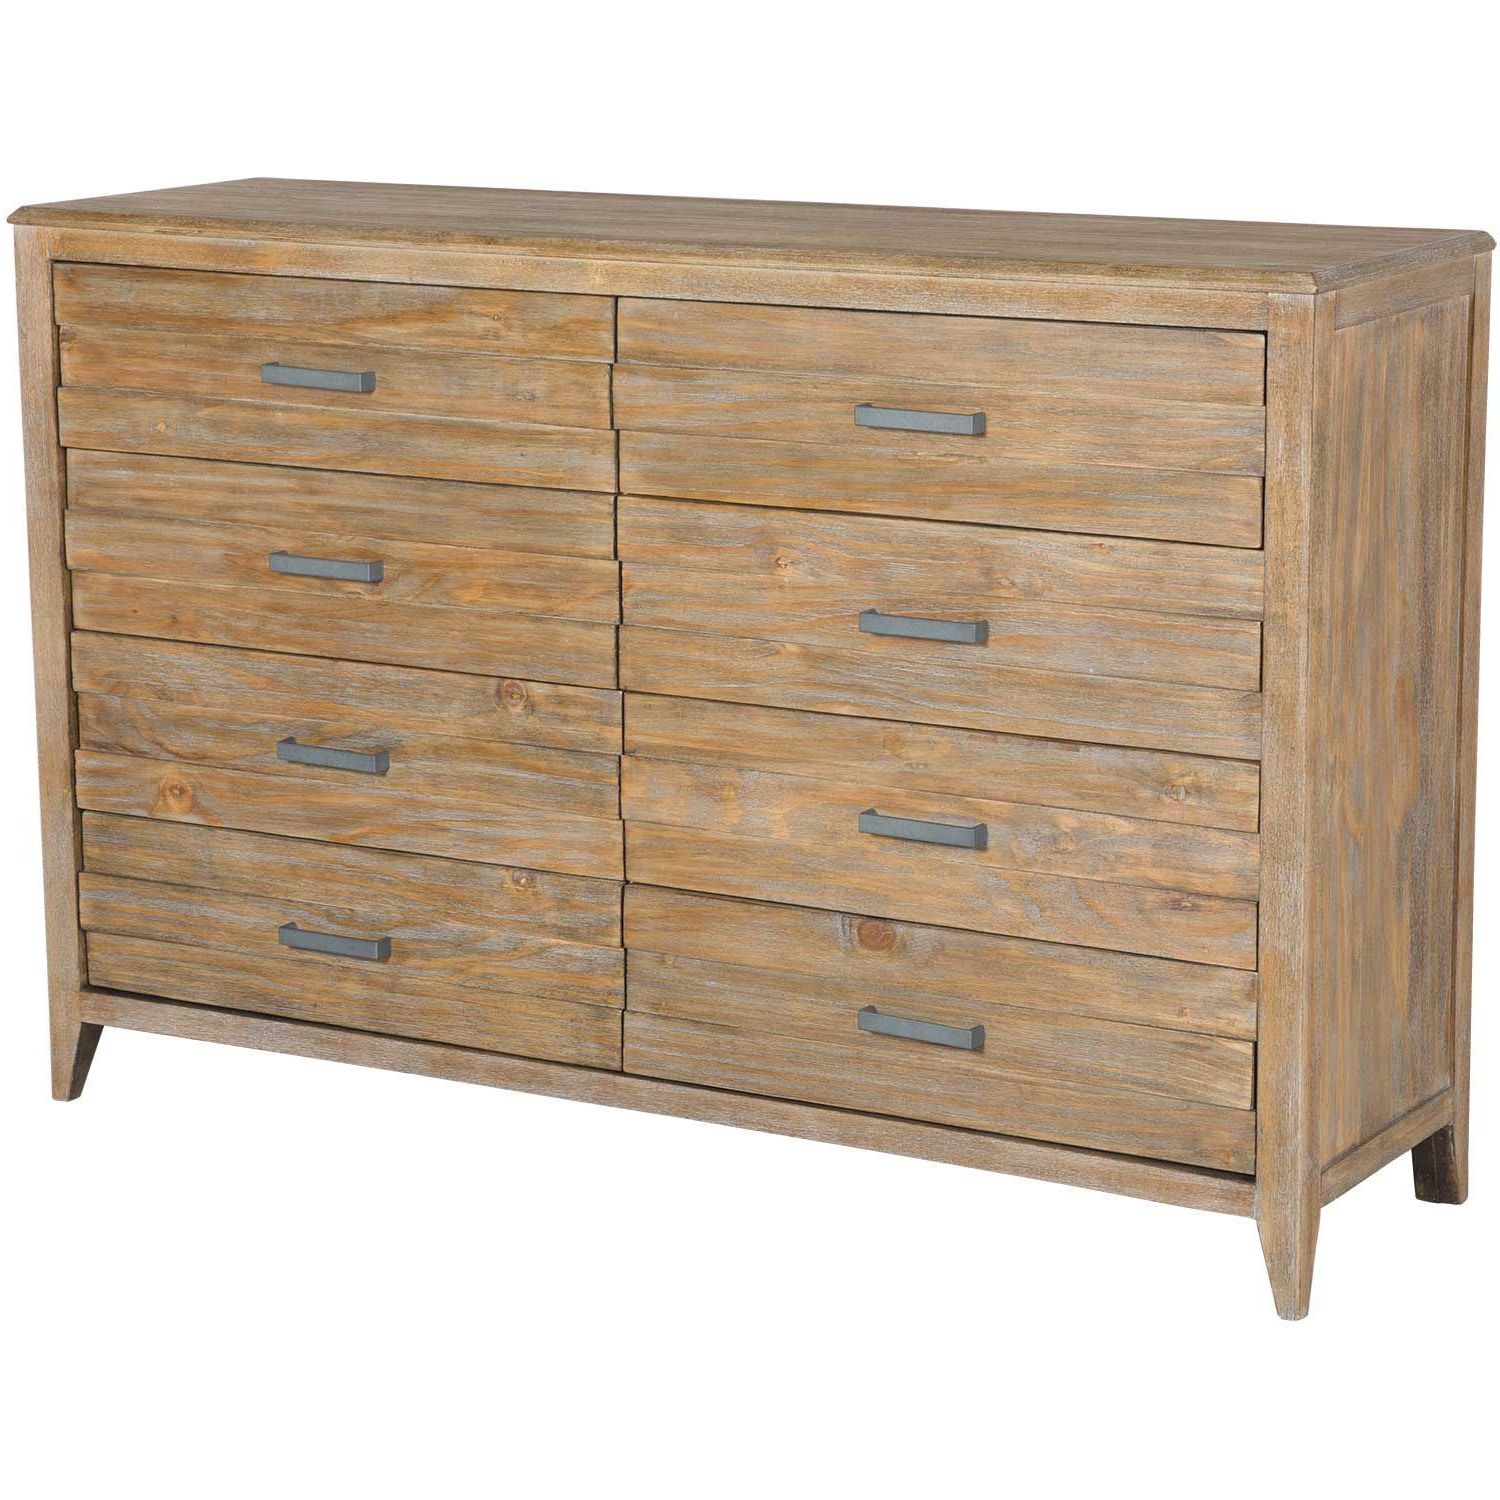 Torino 8 Drawer Dresser Pertaining To Emerald Cubes Credenzas (View 17 of 20)